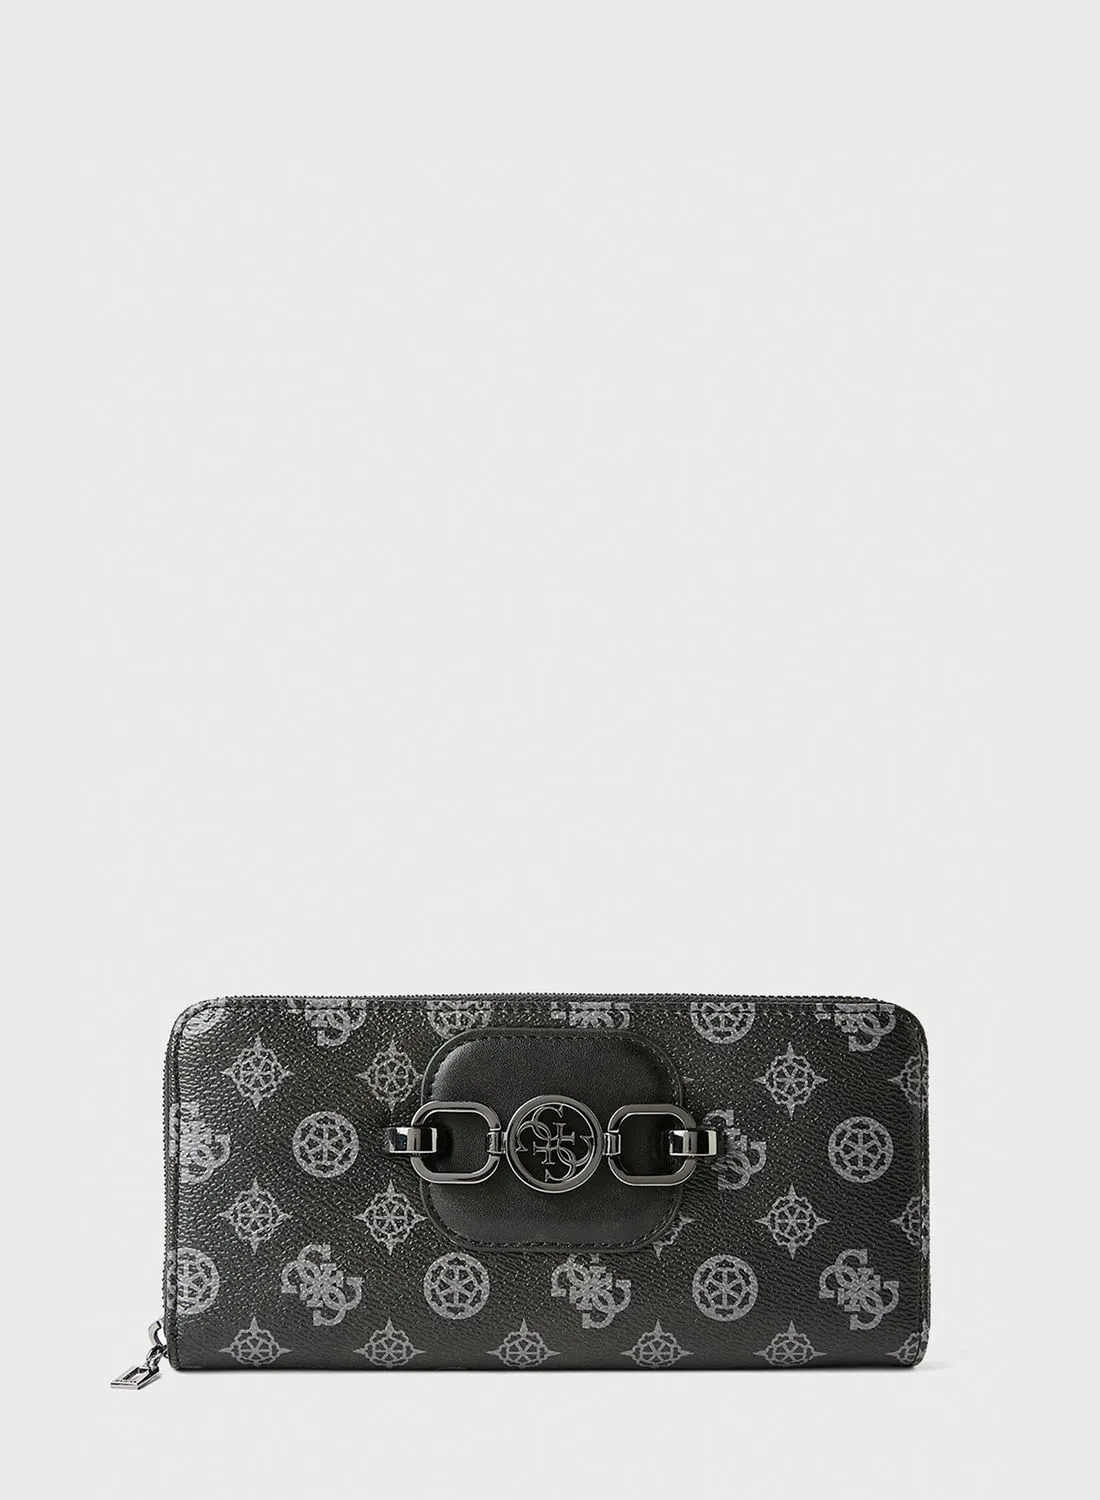 GUESS Hensely Zip Around Wallet